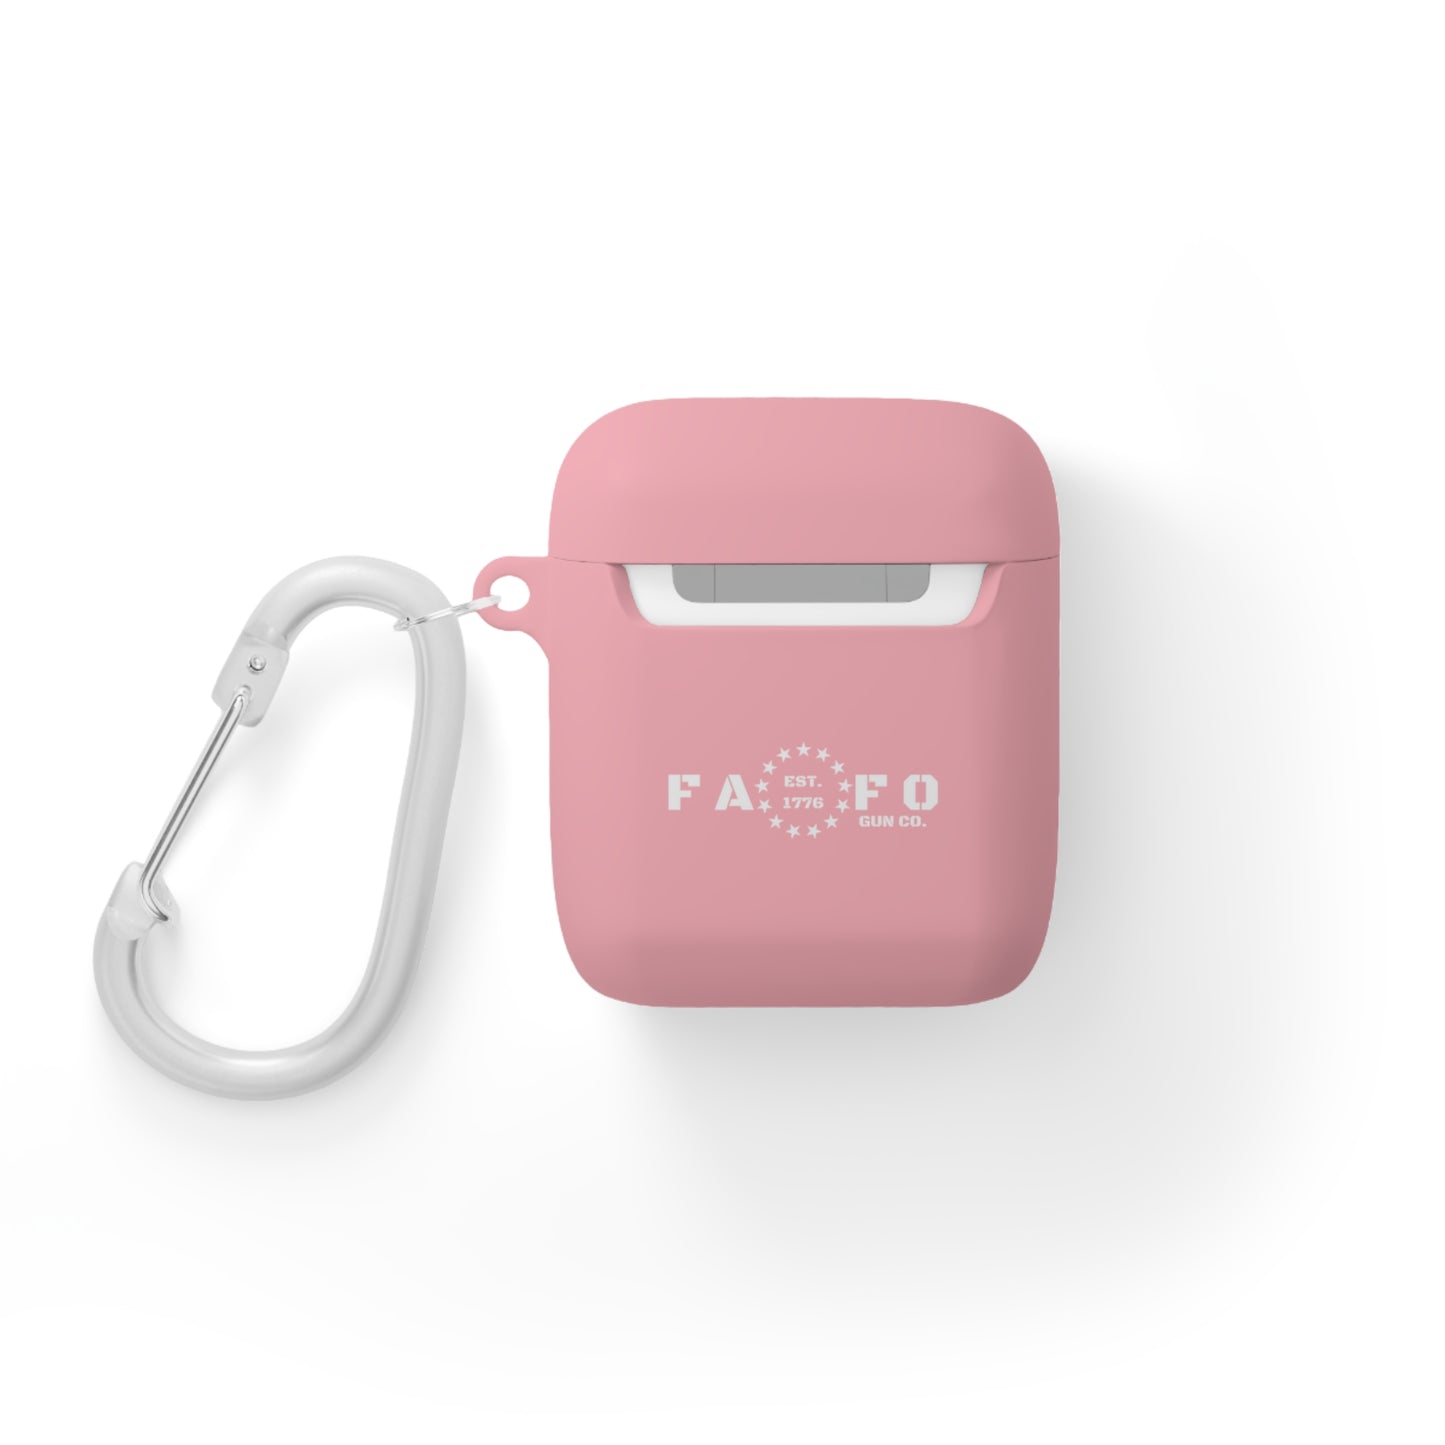 US Of FAFO Eagle AirPods and AirPods Pro Case Cover